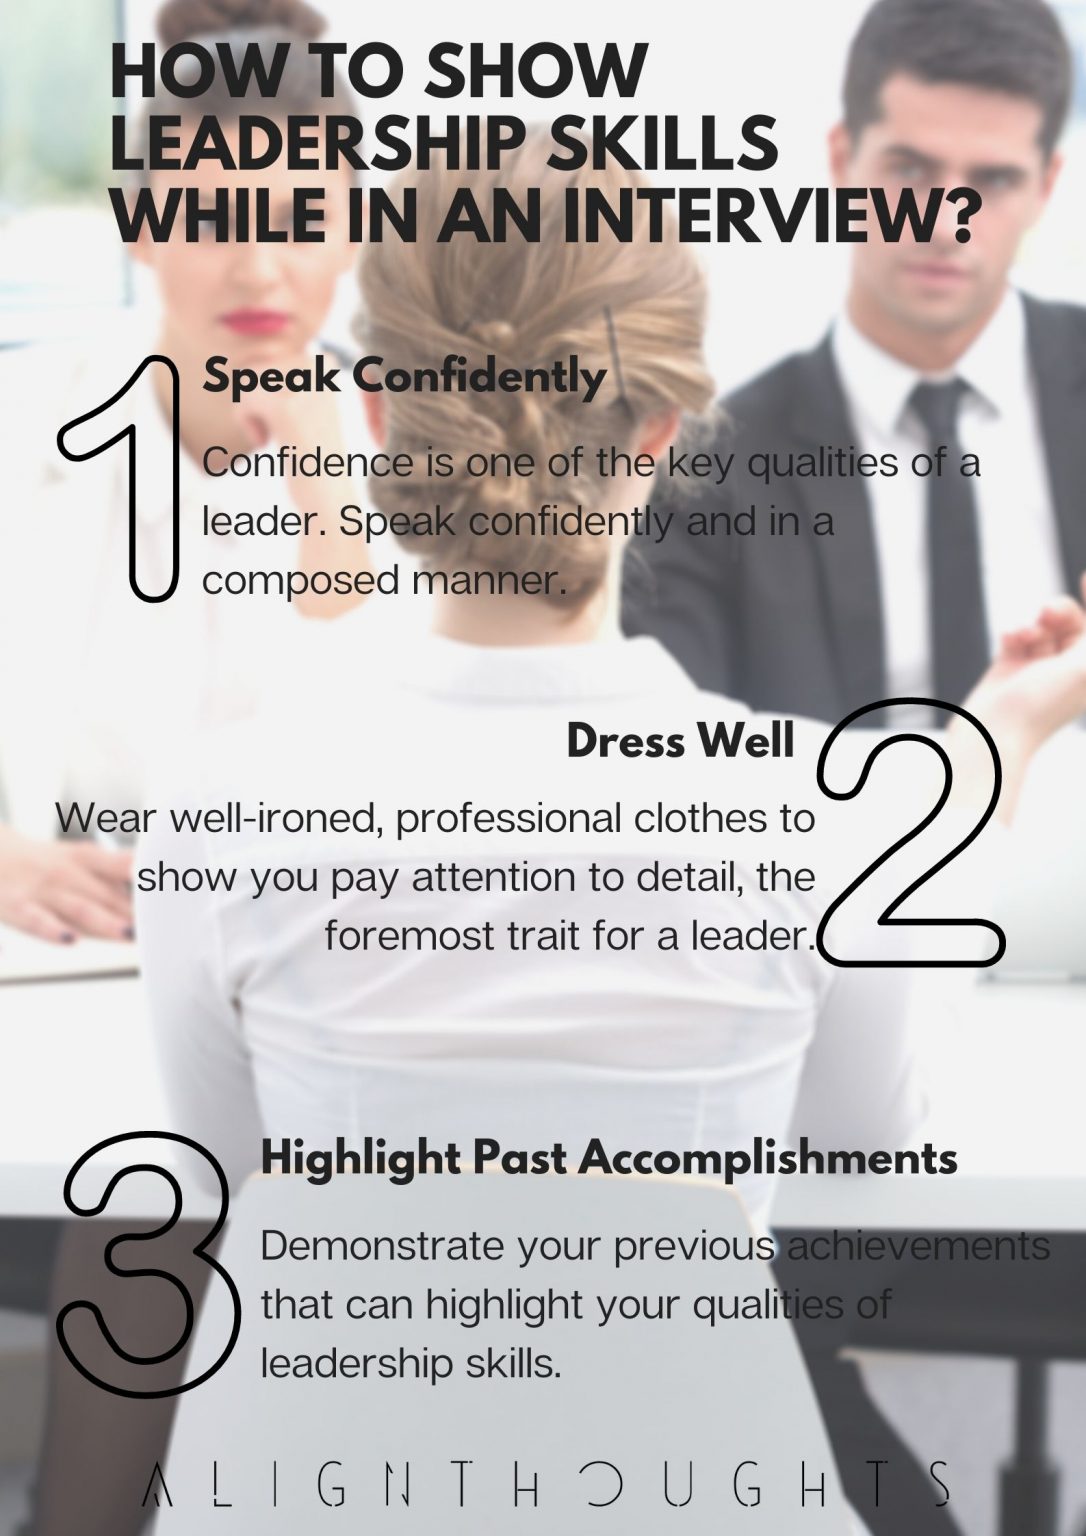 Leadership Skills Examples For An Interview Alignthoughts 1086x1536 